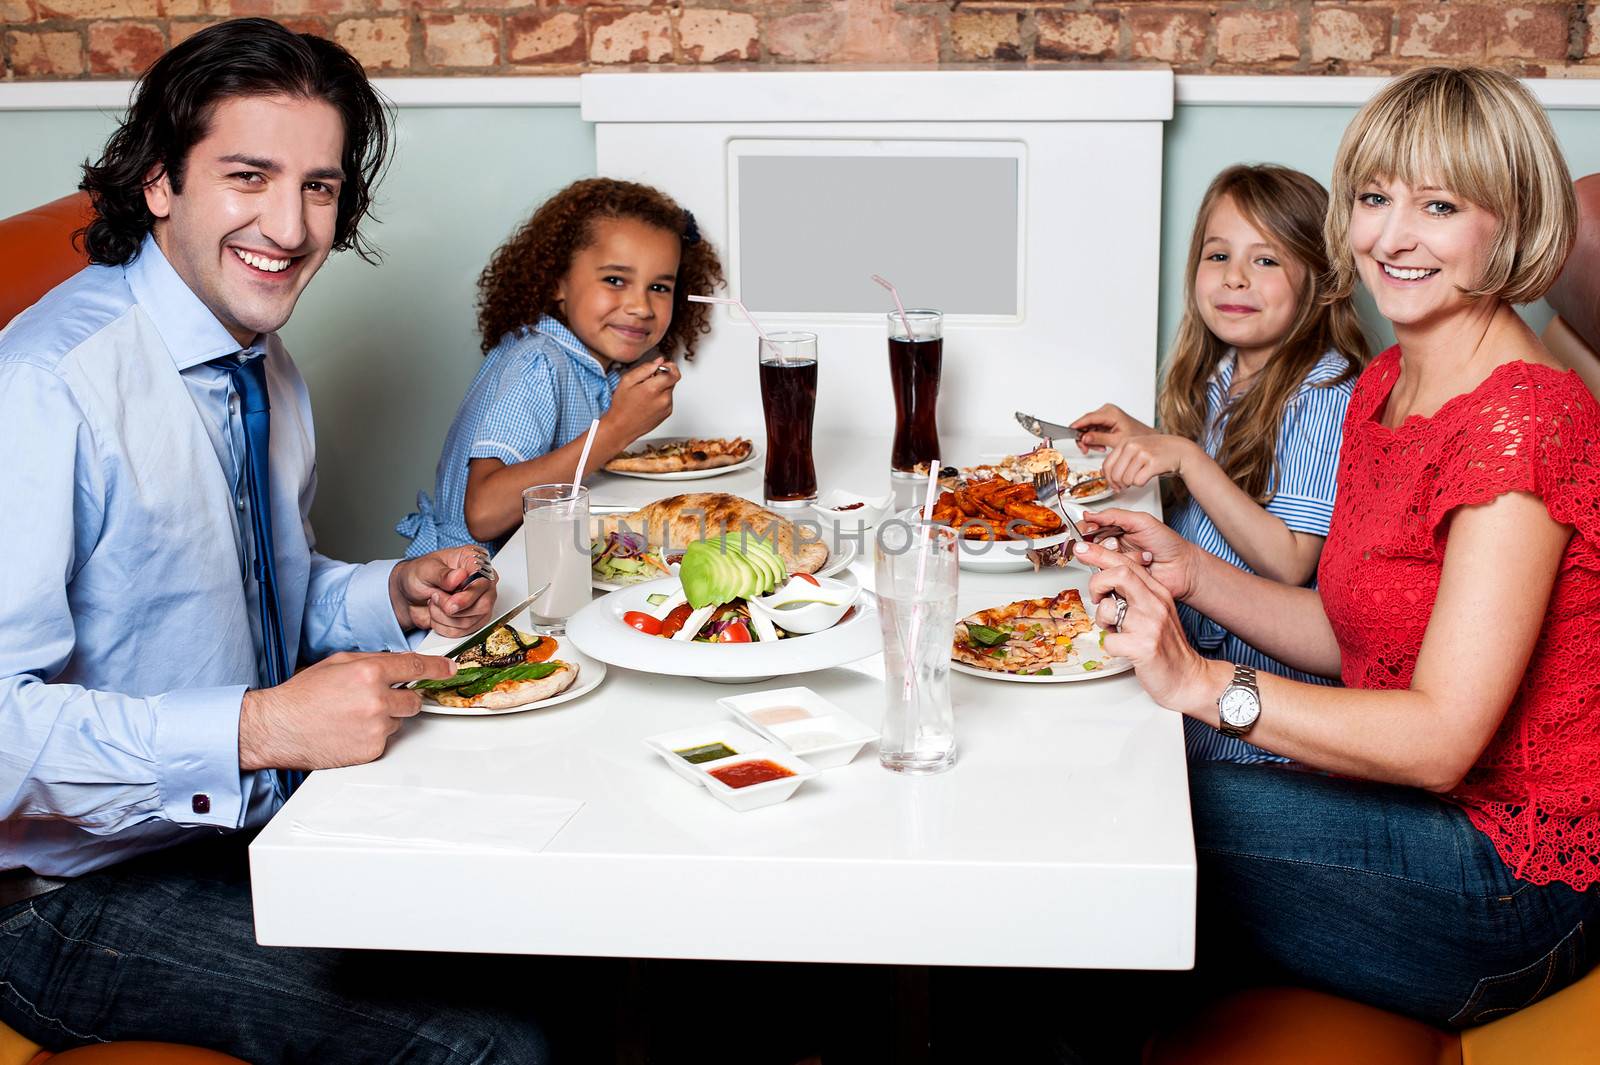 Family eating together in a restaurant by stockyimages